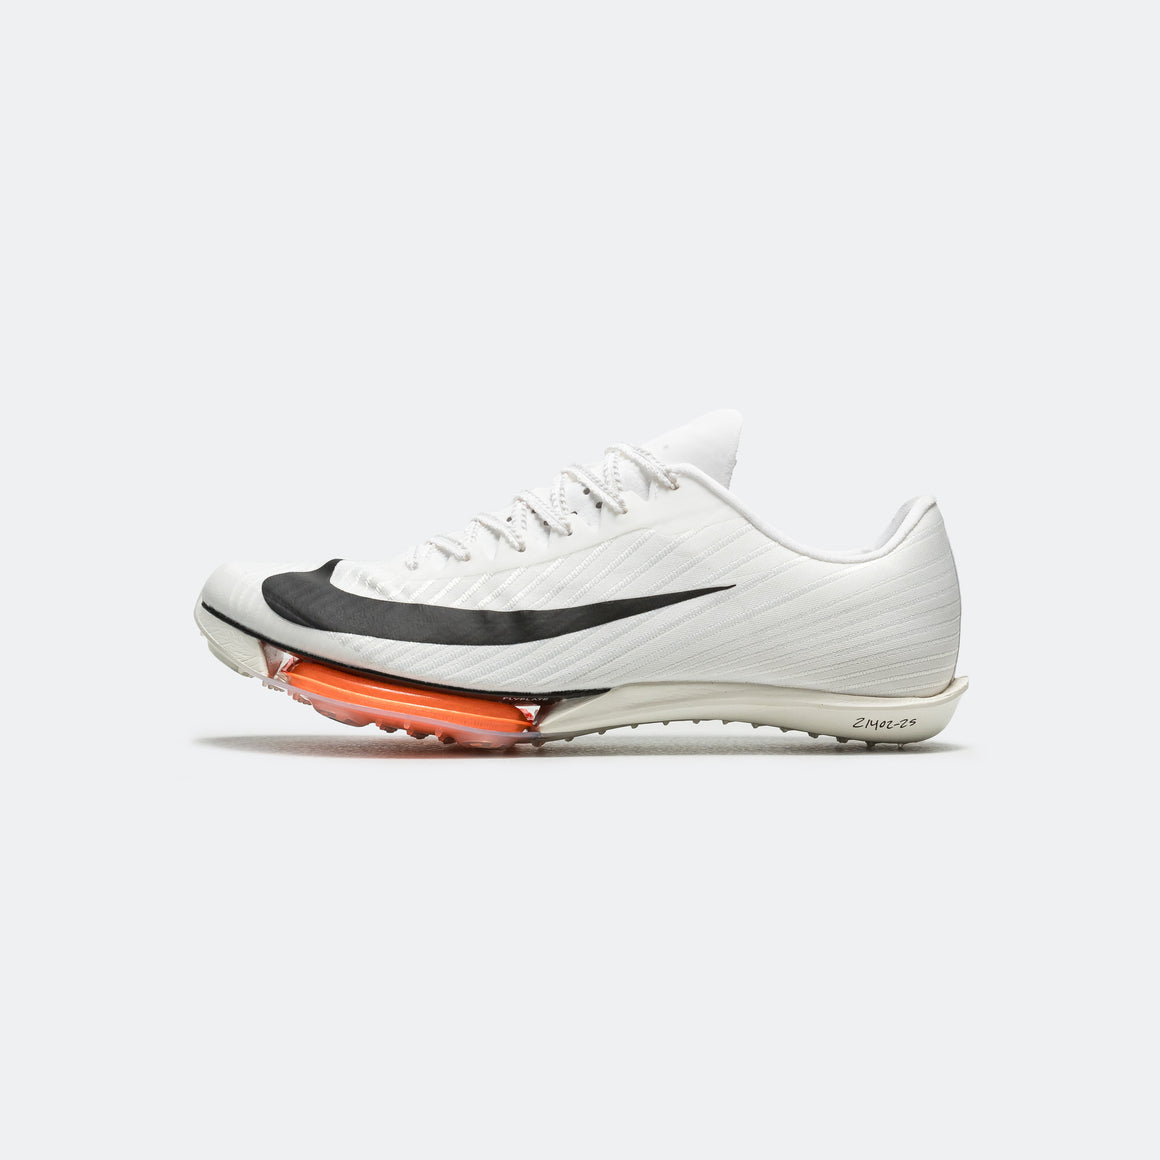 Nike Air Zoom Maxfly 2 Proto - White/Black-Total Orange | Up There ...